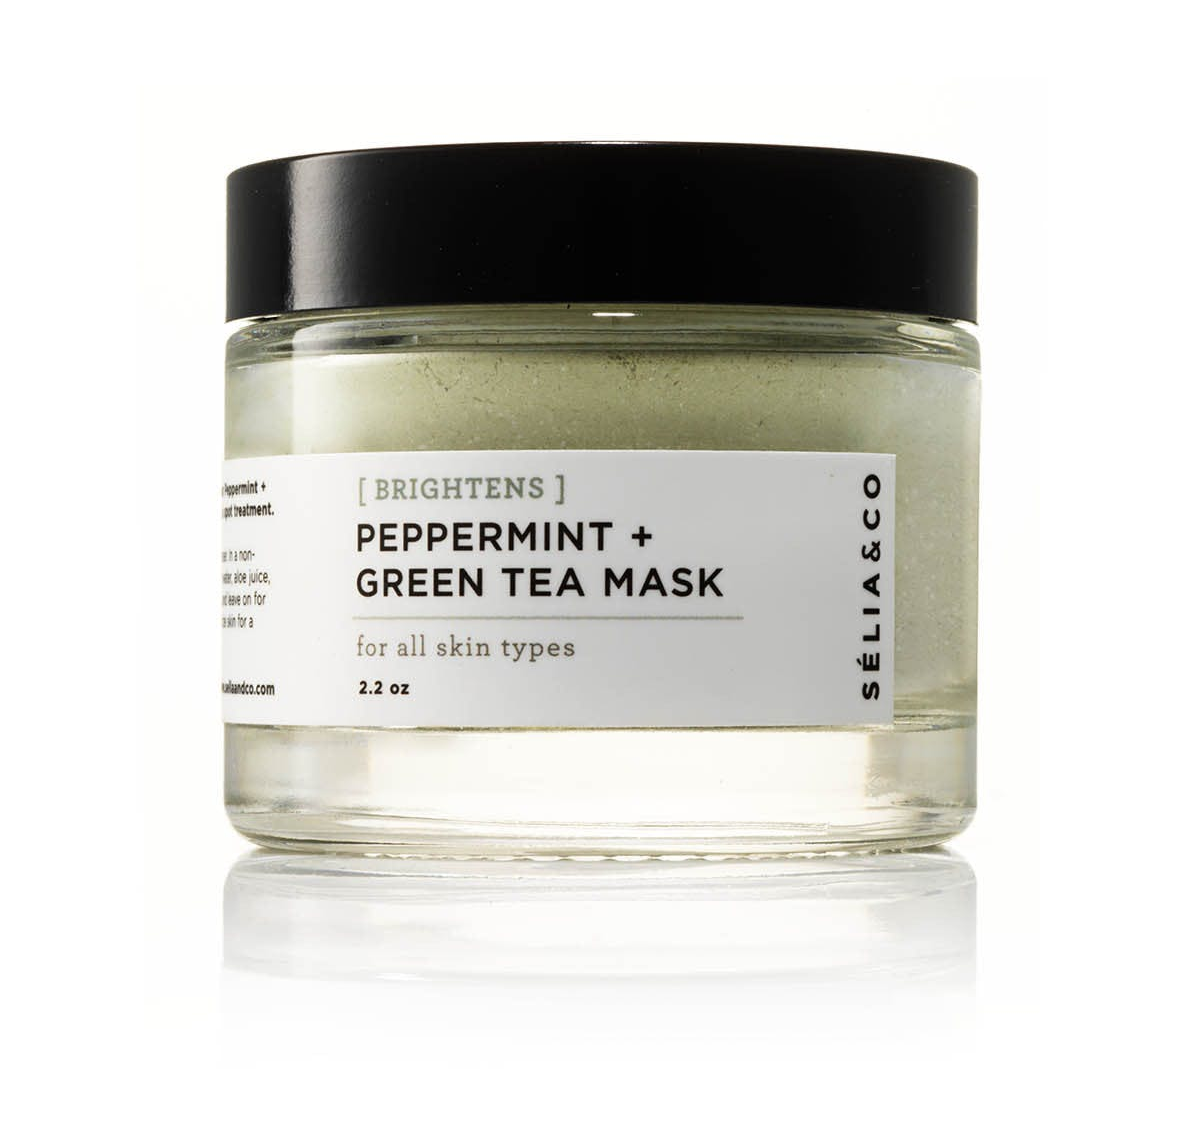 a jar of peppermint and green tea mask